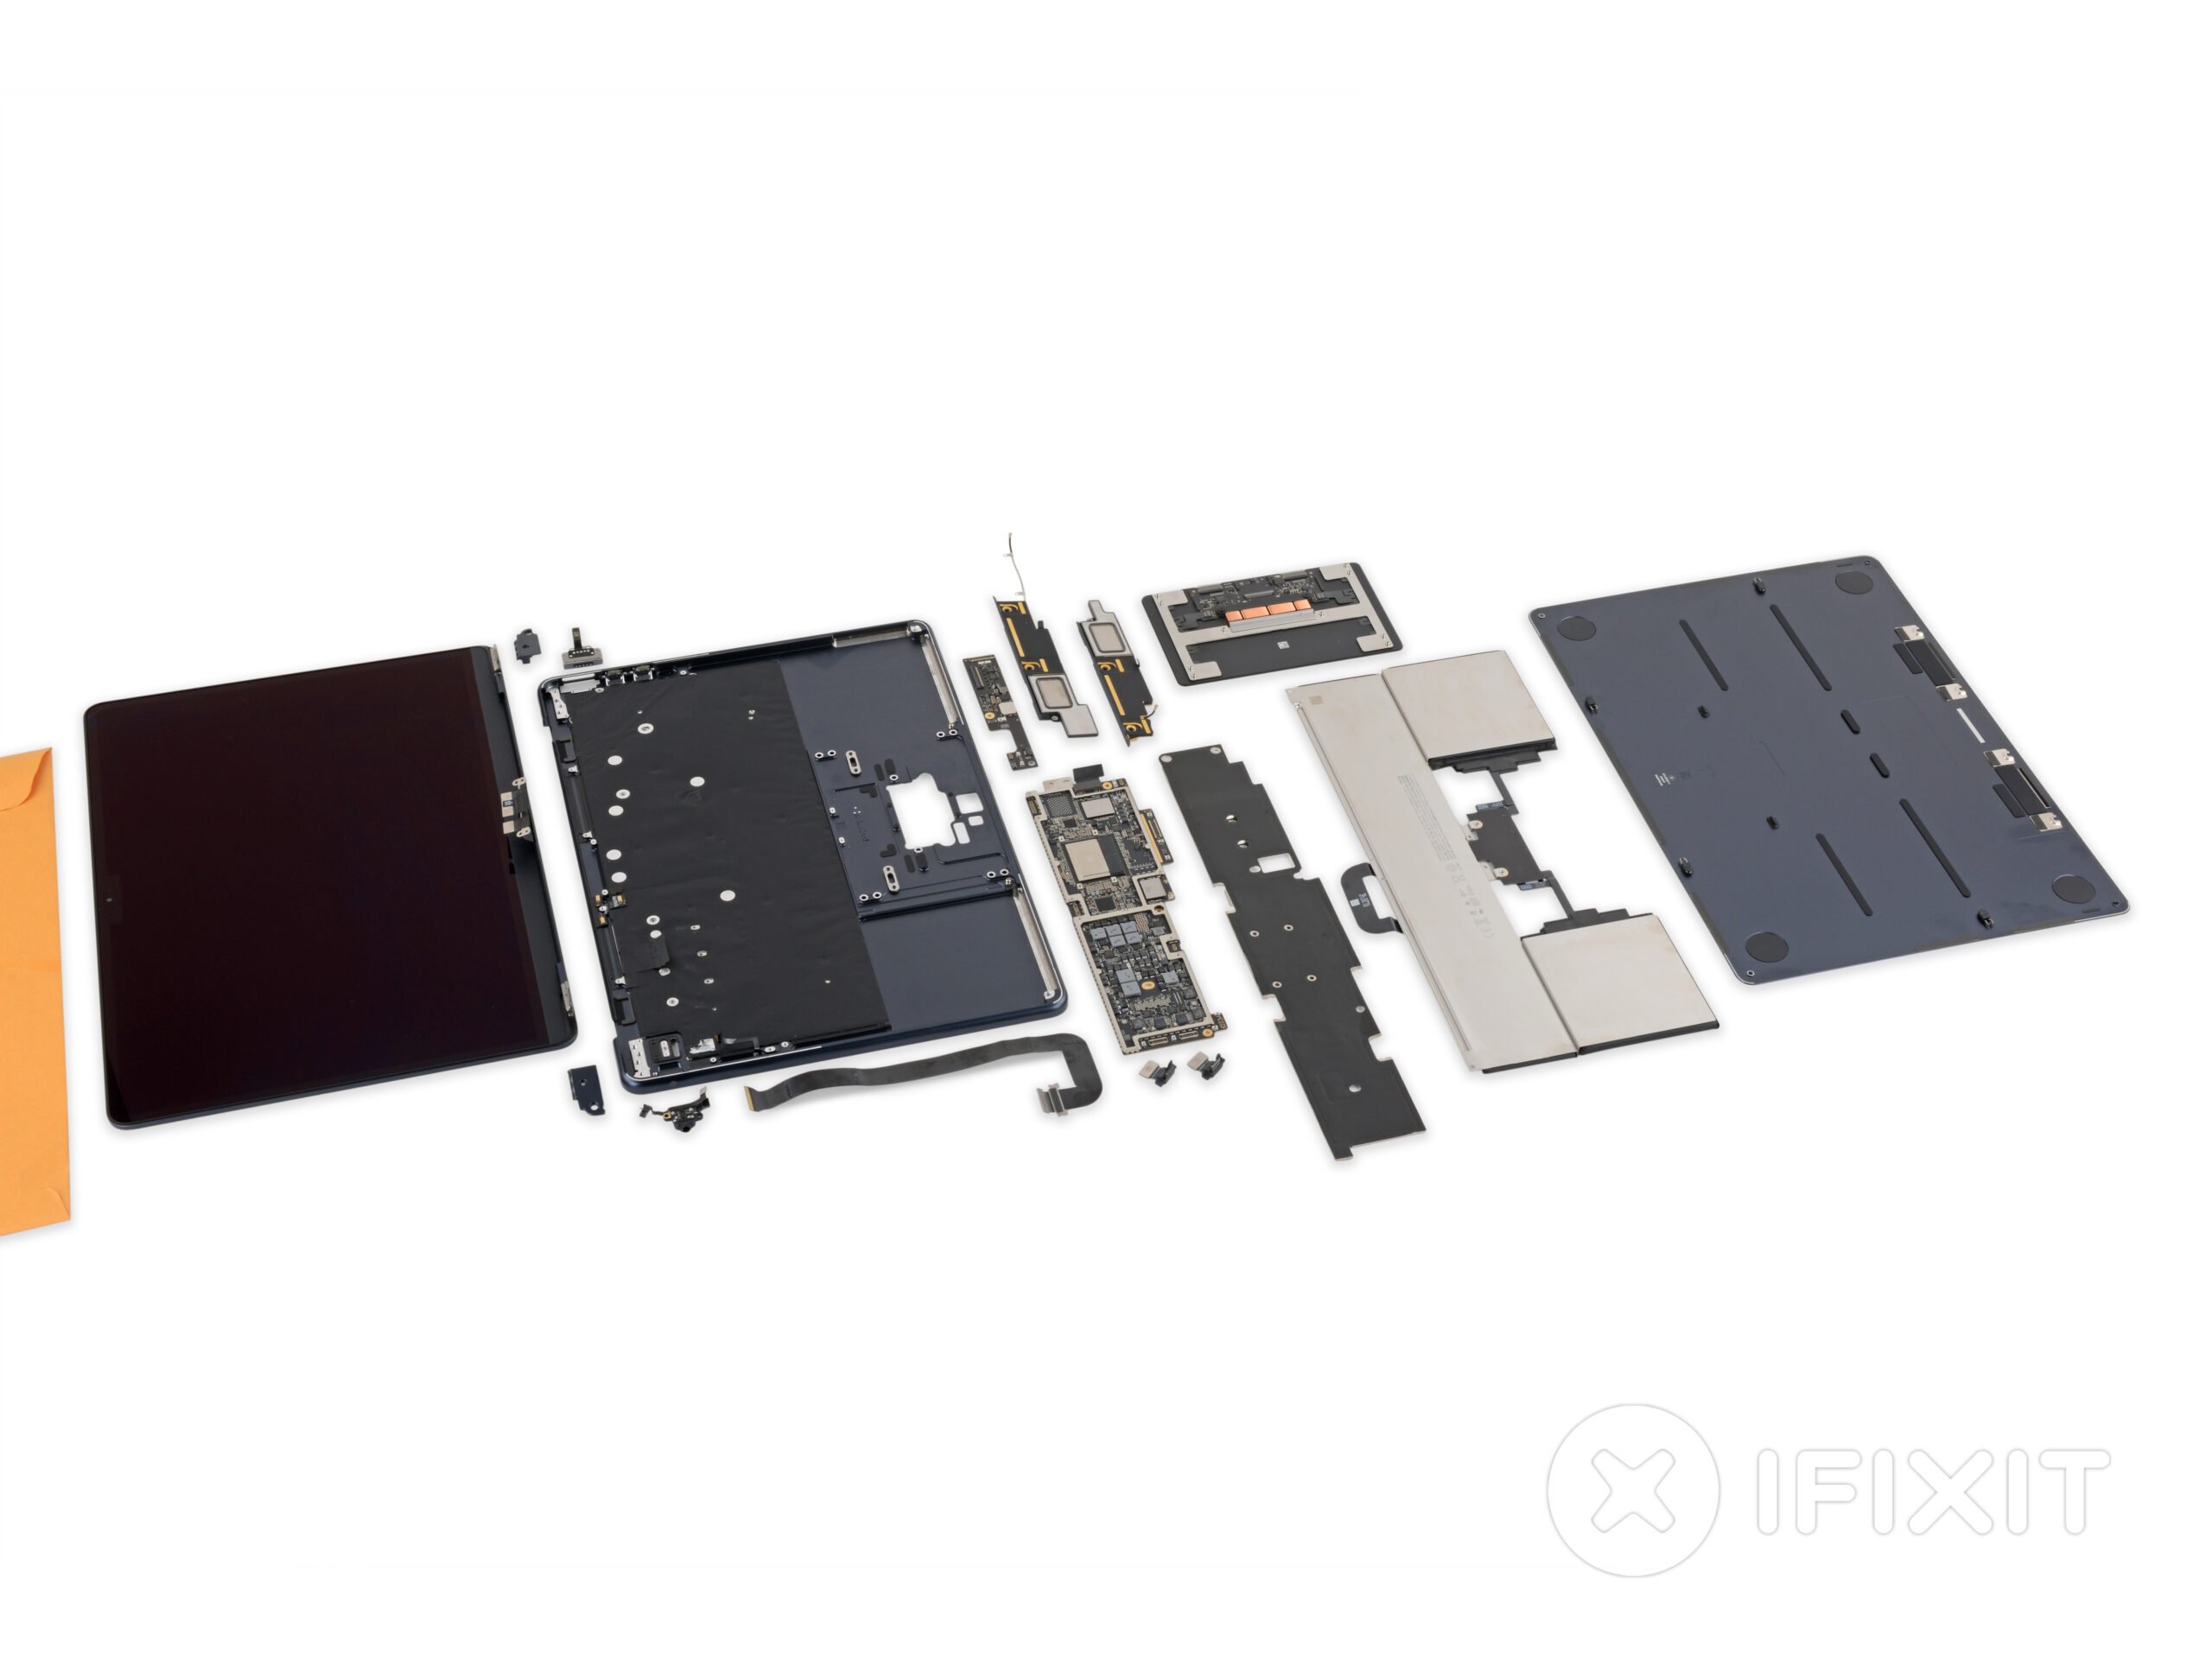 iFixit found an accelerometer inside the new Apple MacBook Air model and found almost no cooling